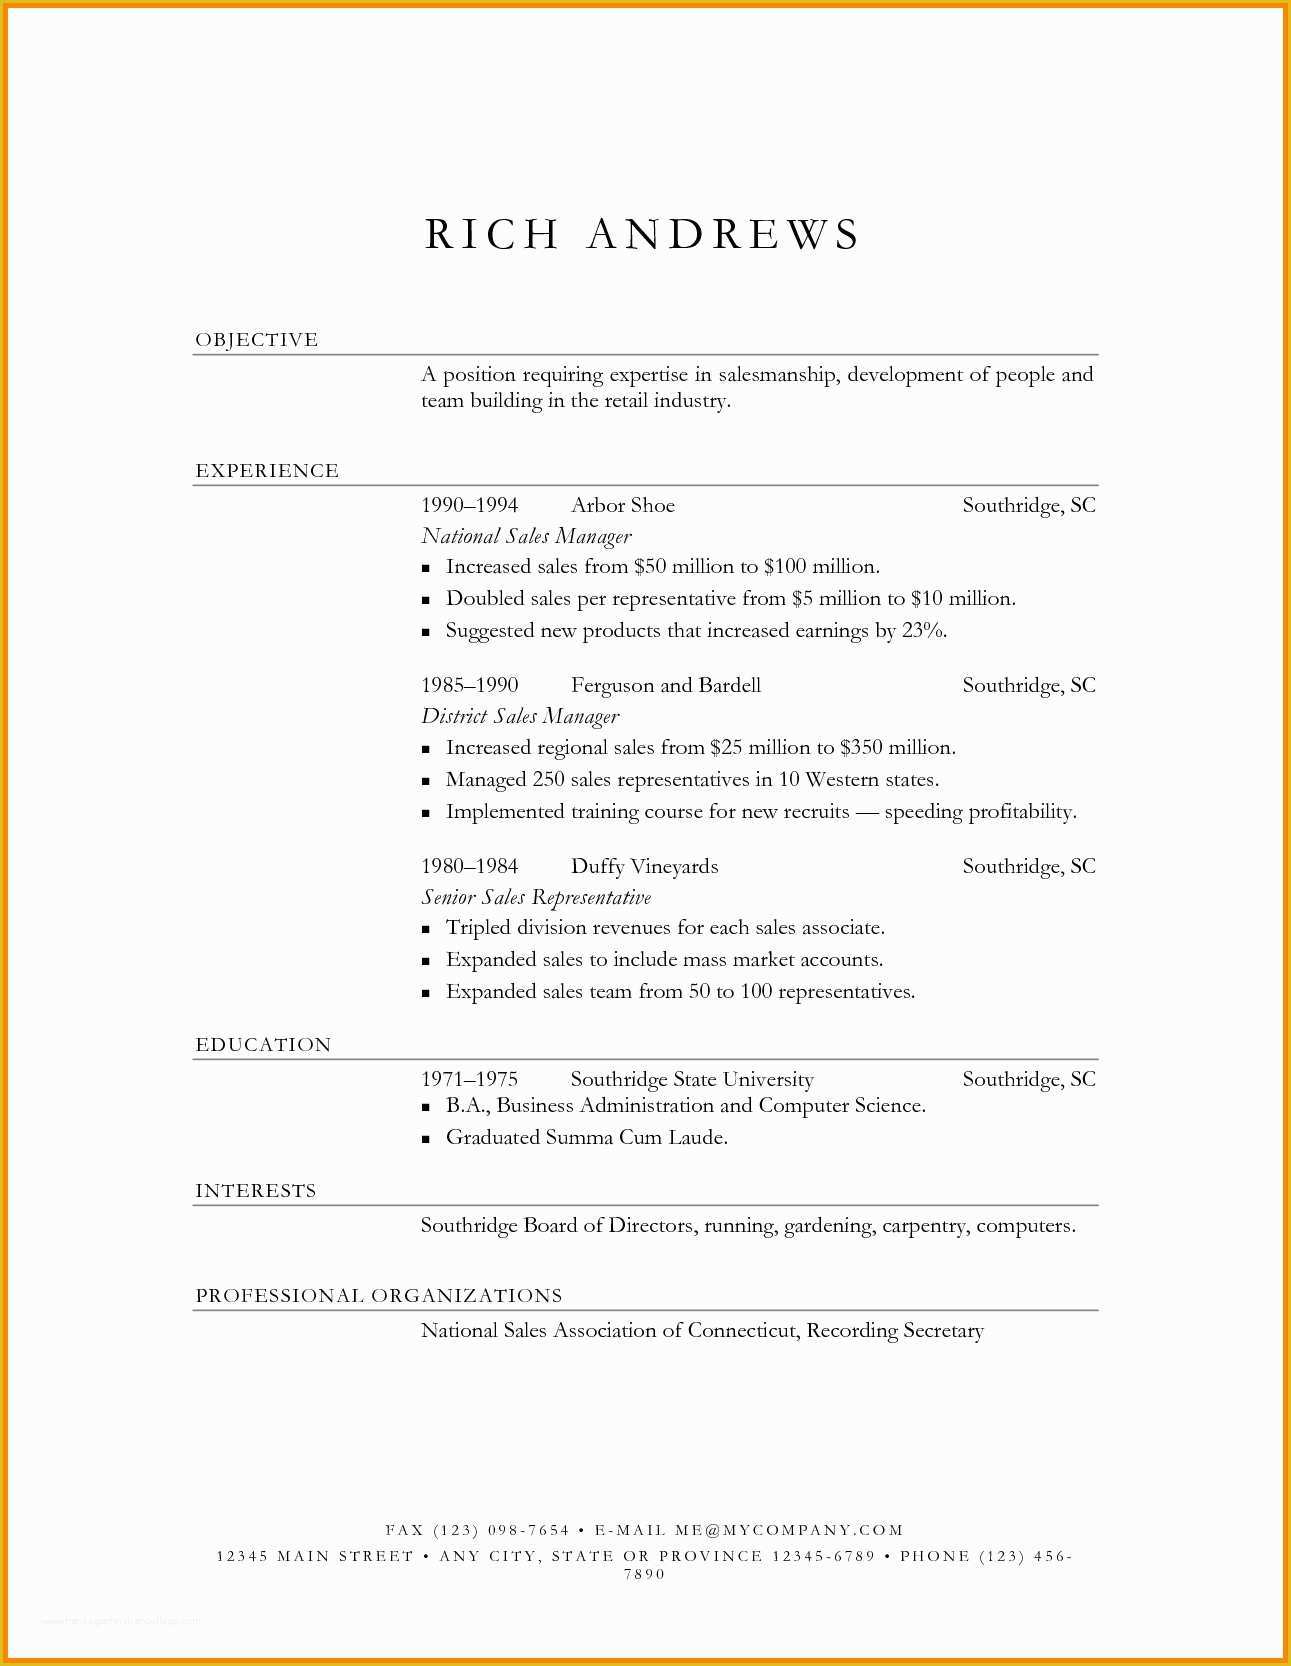 Free Professional Resume Templates Microsoft Word Of Resumes In Word Cover Letter Samples Cover Letter Samples